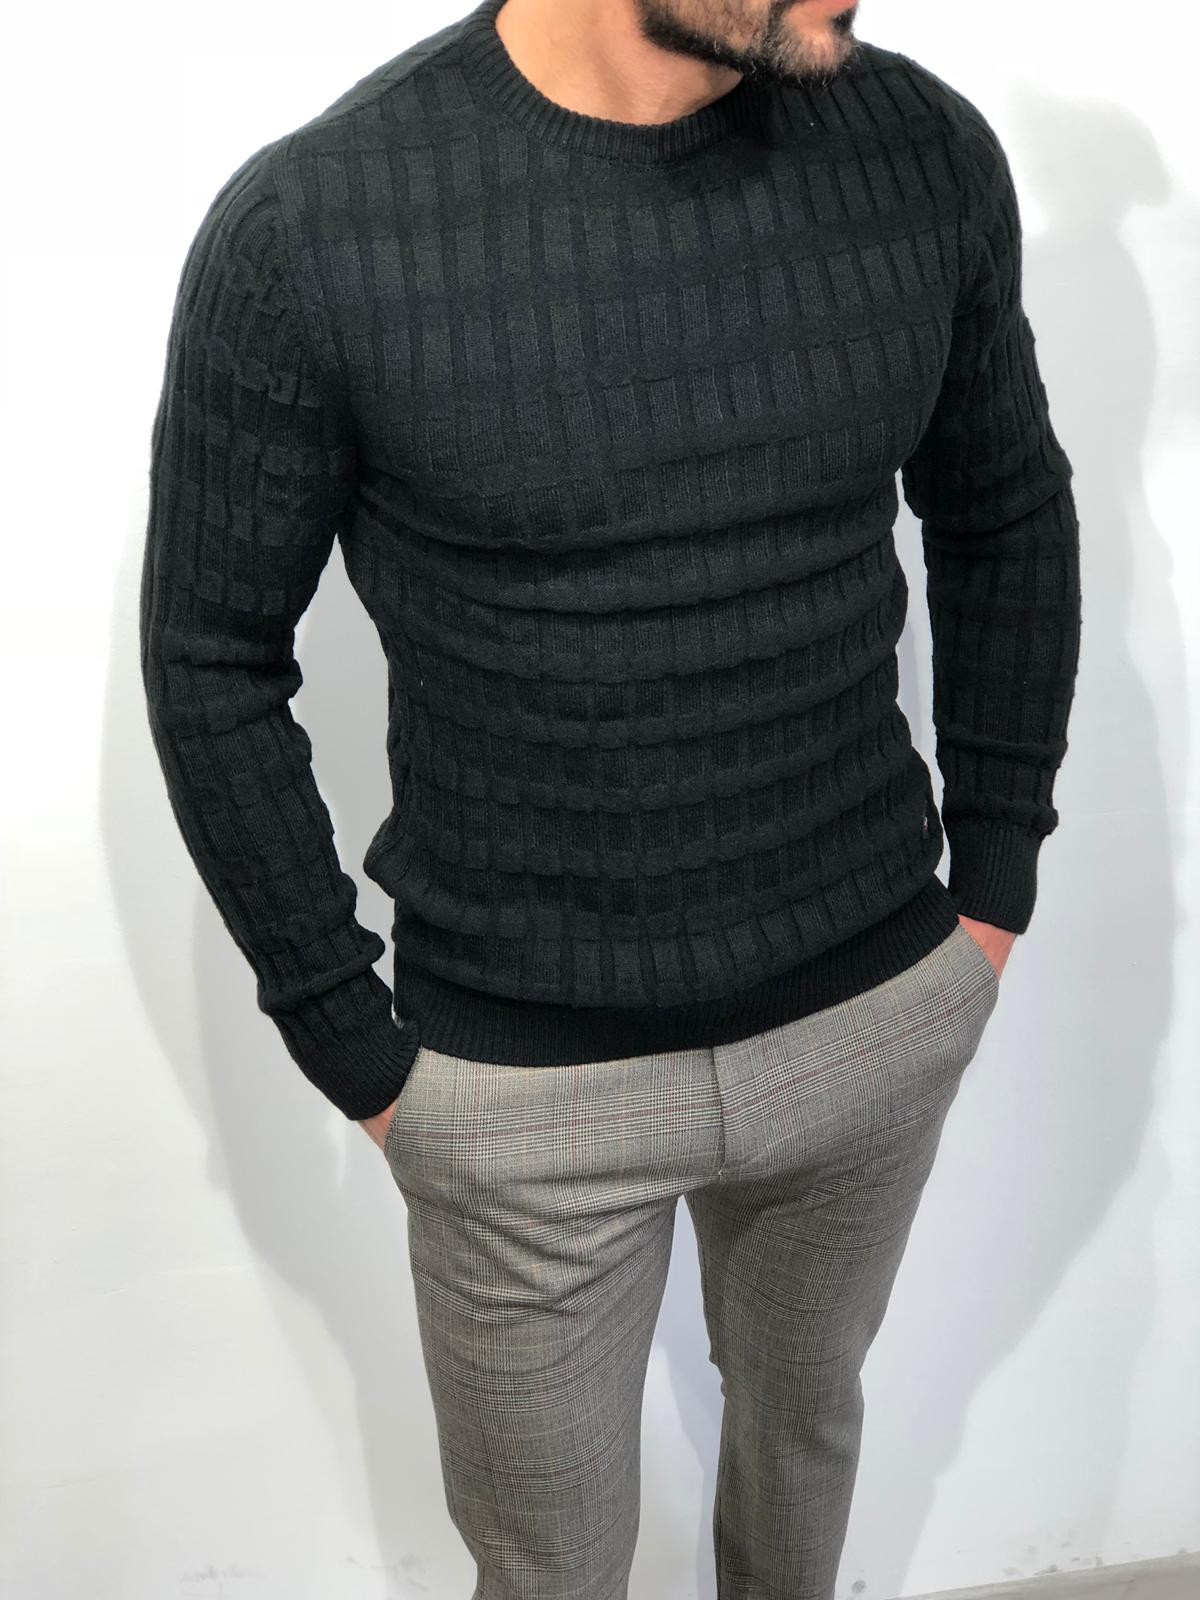 Buy Black Slim Fit Sweater by Gentwith.com with Free Shipping